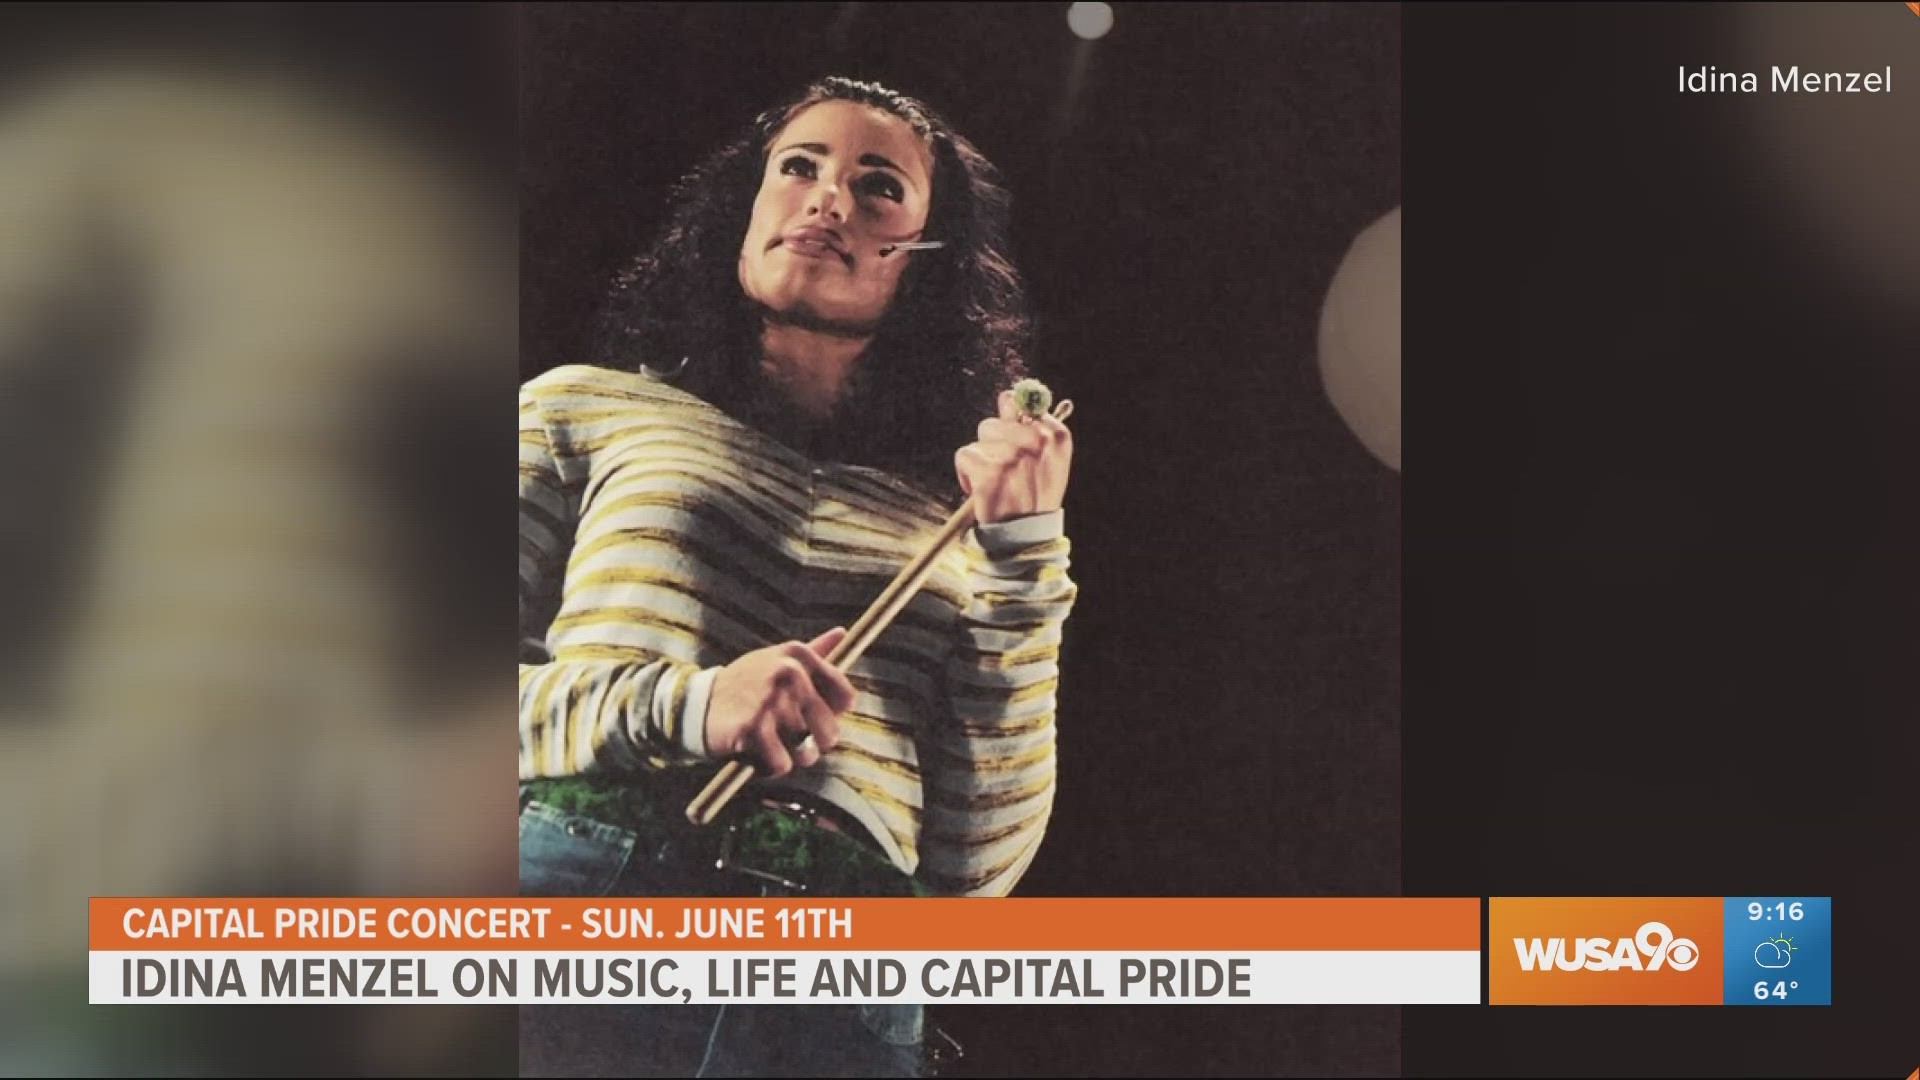 Idina Menzel chats about her life and music ahead of headlining the 2023 Capital Pride Concert on June 12th, 2023.